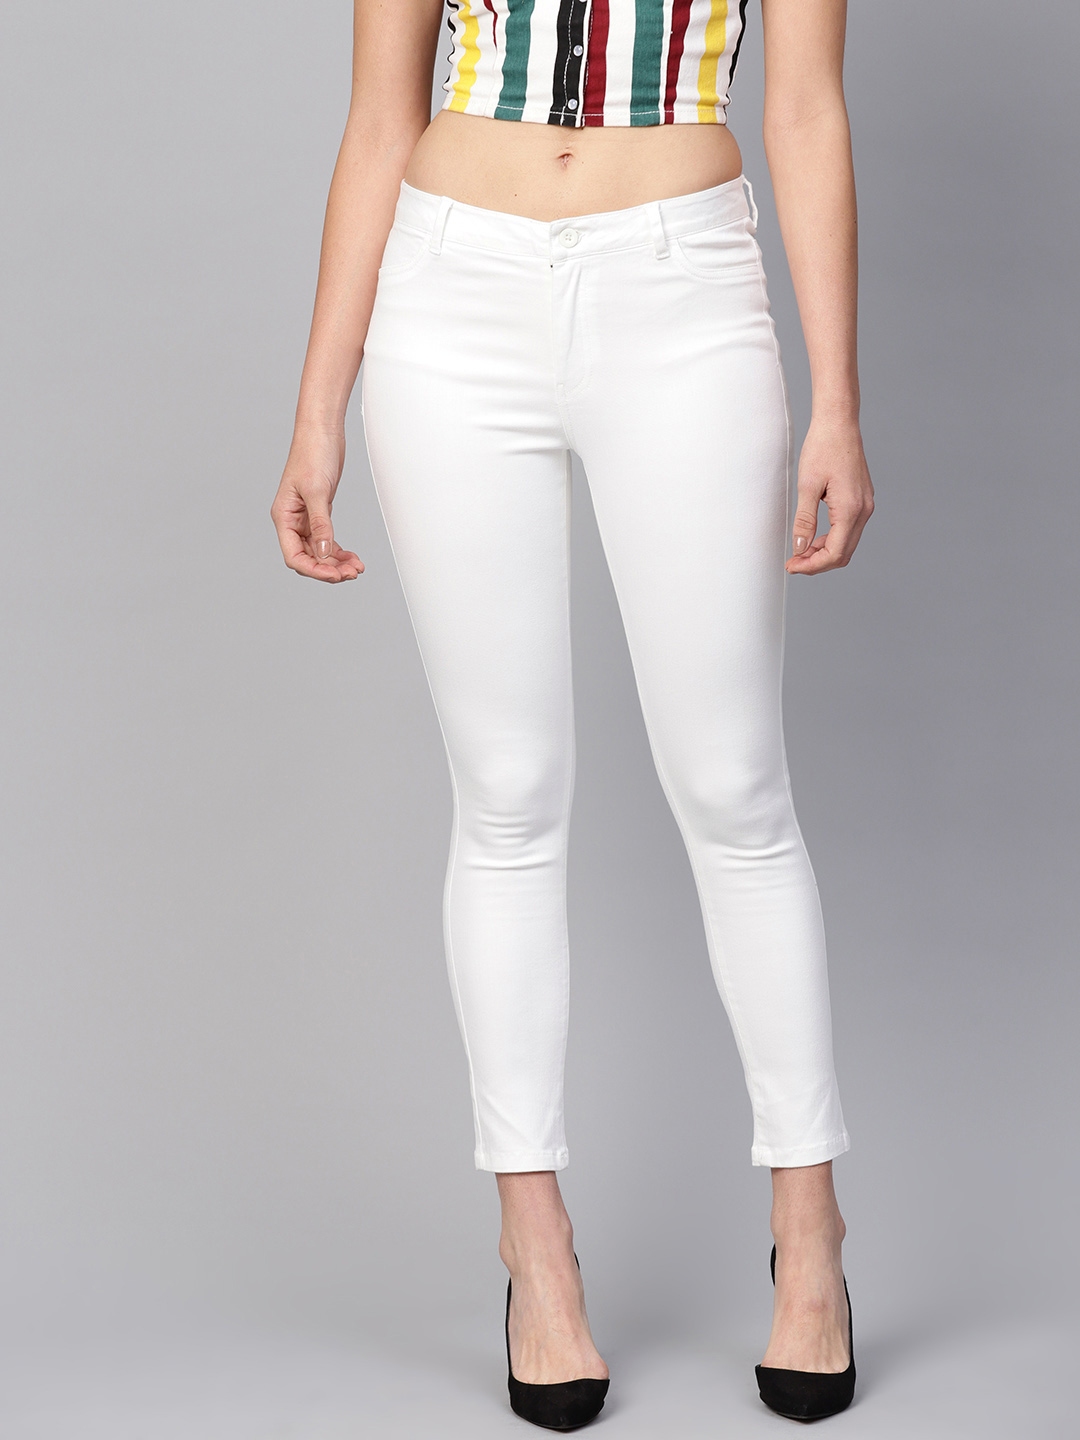 Buy W Women White Regular Fit Mid Rise Clean Look Stretchable Jeans ...